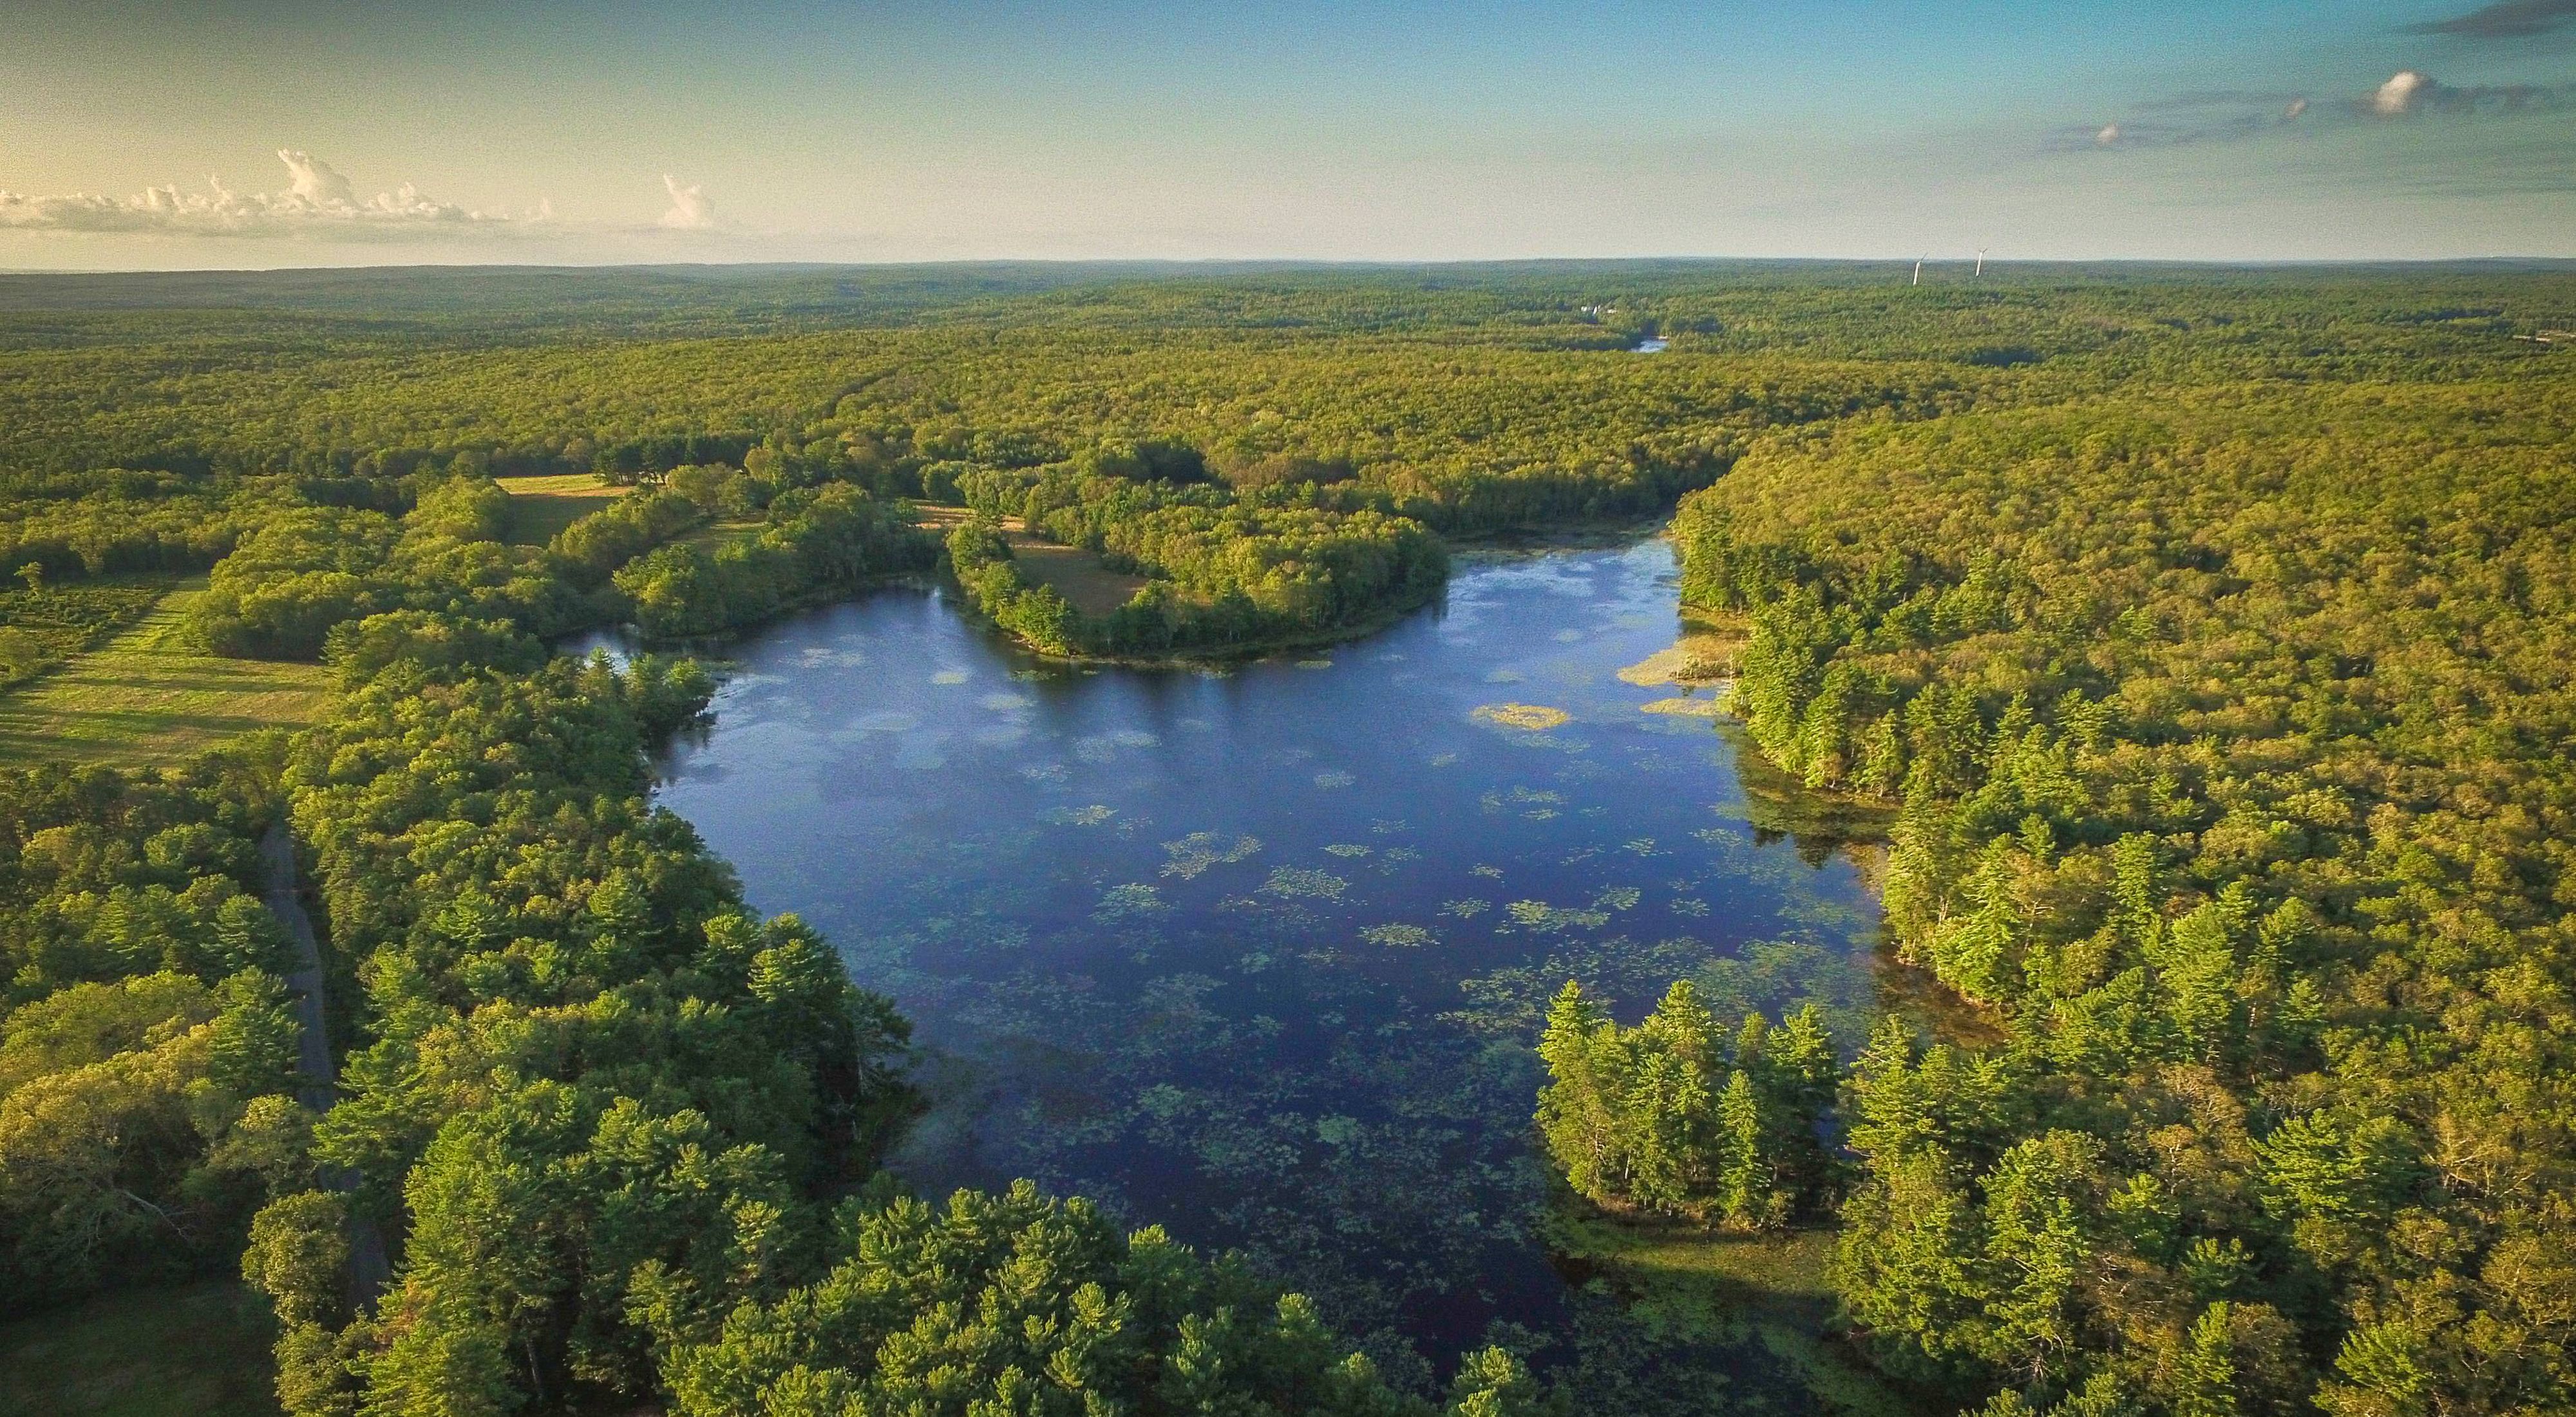 Aerial view of a heart-shaped pond, surrounded by green forest out to the horizon.